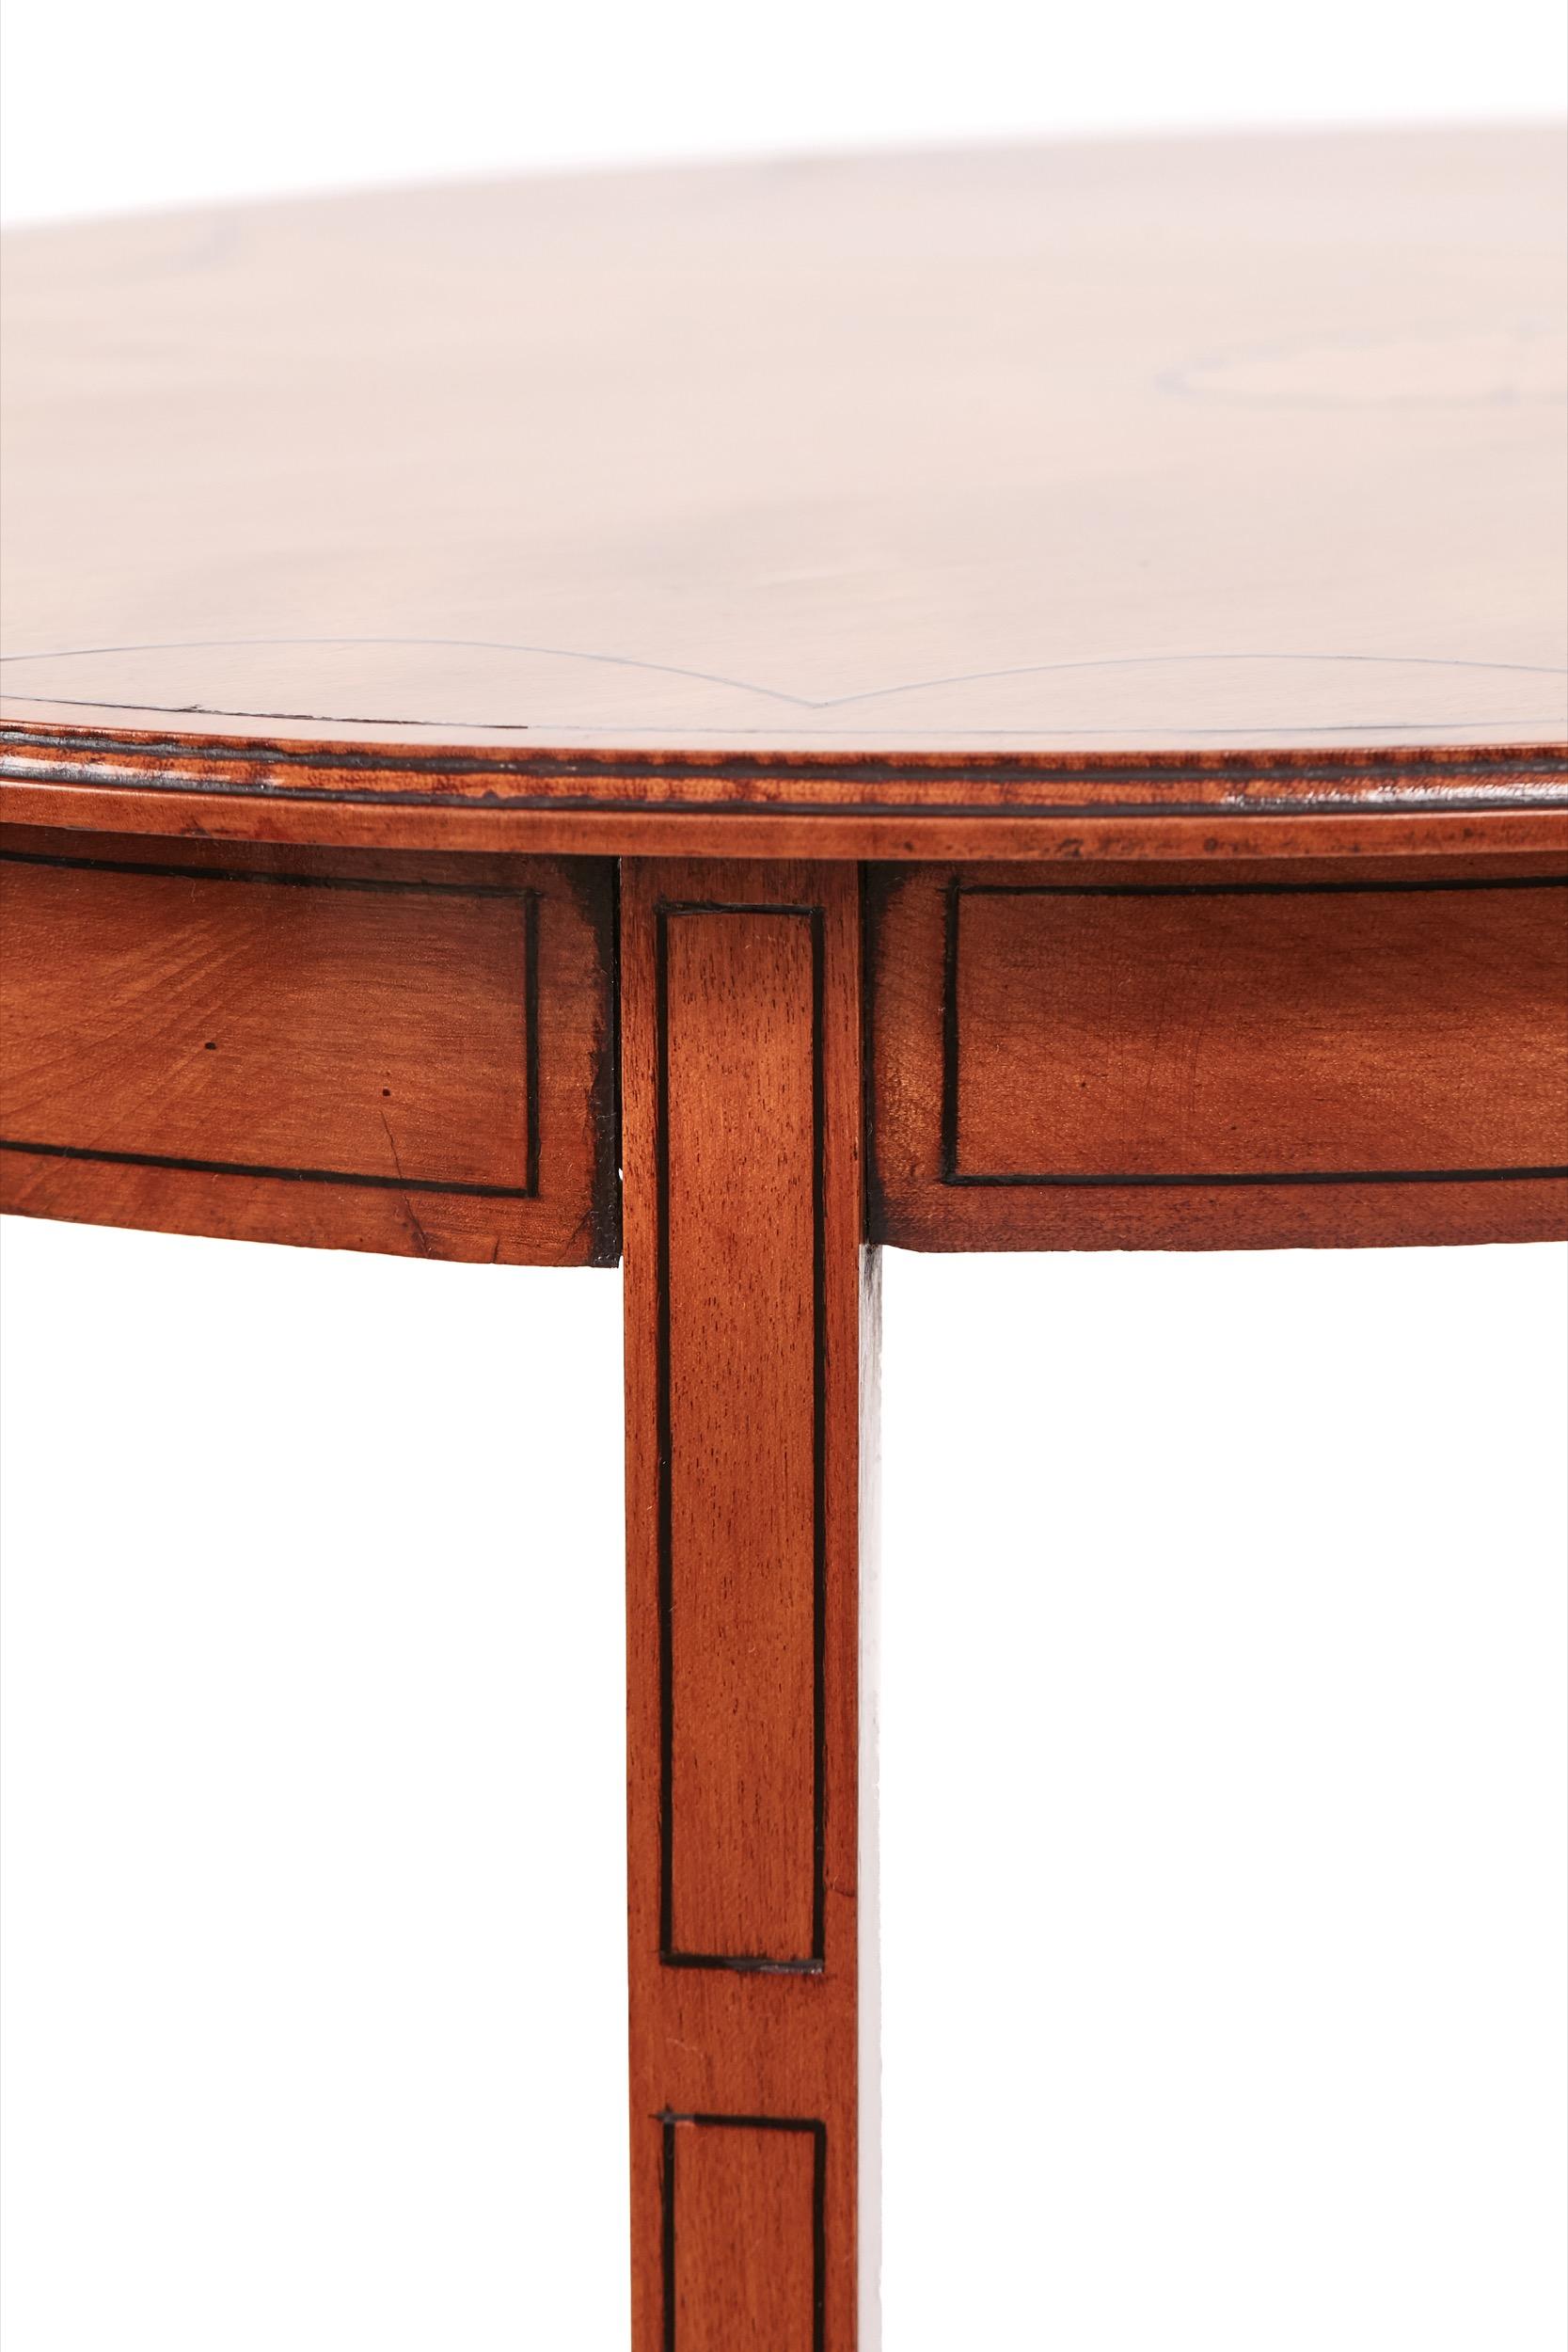 Quality Edwardian satinwood inlaid oval lamp table, having a lovely oval satinwood top inlaid with boxwood fans, standing on four square tapering inlaid legs with shaped feet, united by shaped supports with a small oval under-tier
Lovely color and